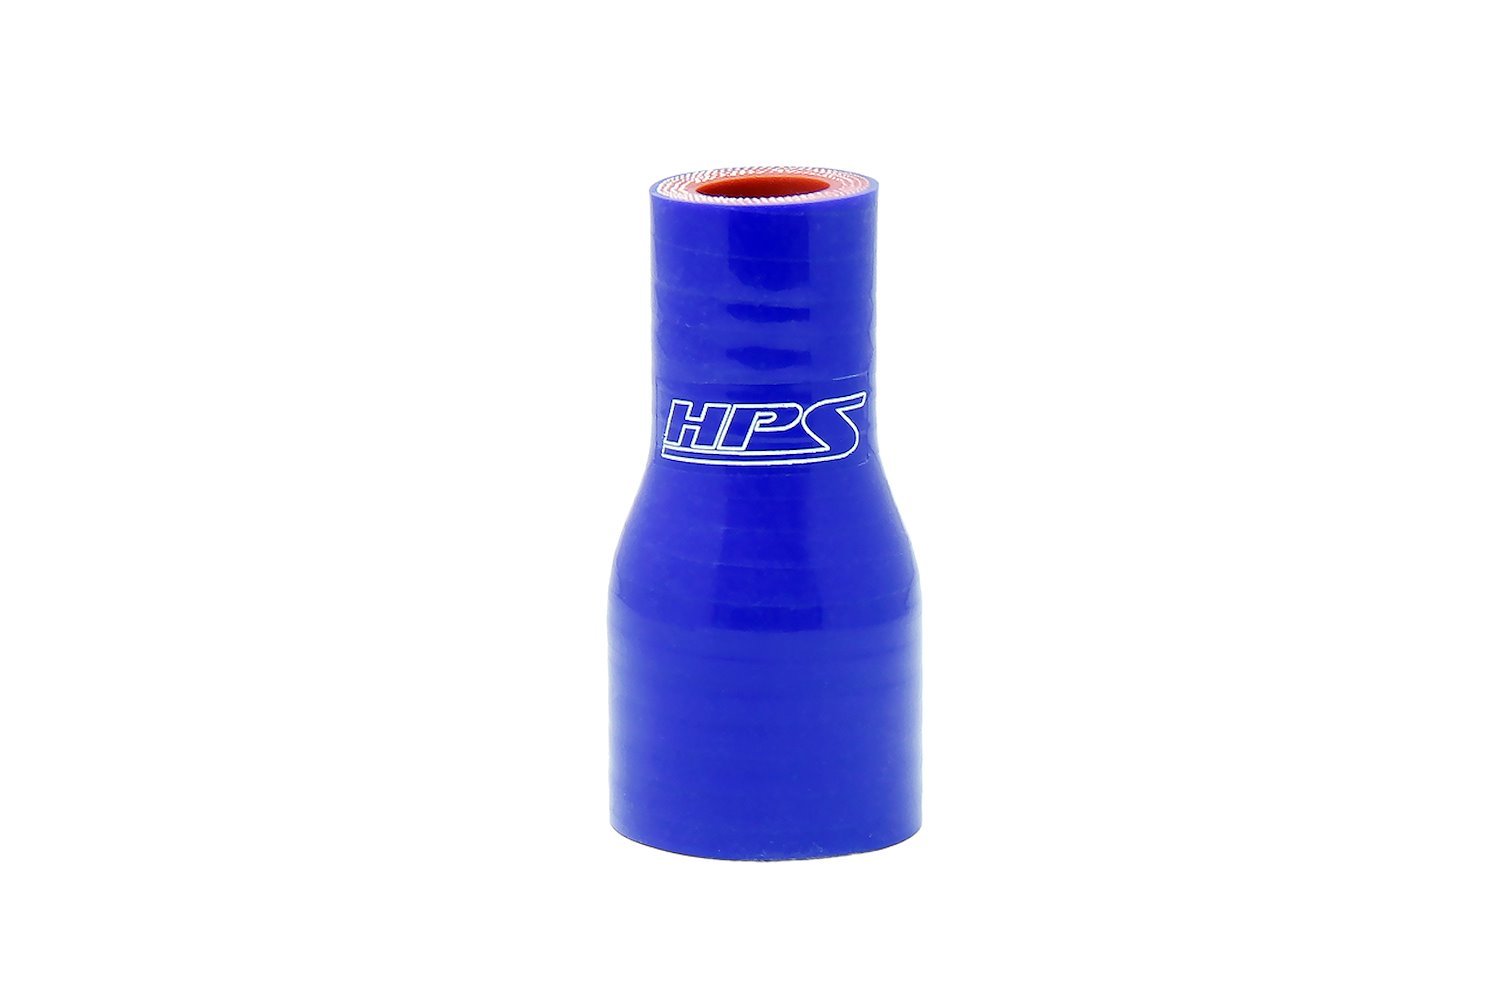 HTSR-087-150-BLUE Silicone Reducer Hose, High-Temp 4-Ply Reinforced, 7/8 in. - 1-1/2 in. ID, 3 in. Long, Blue